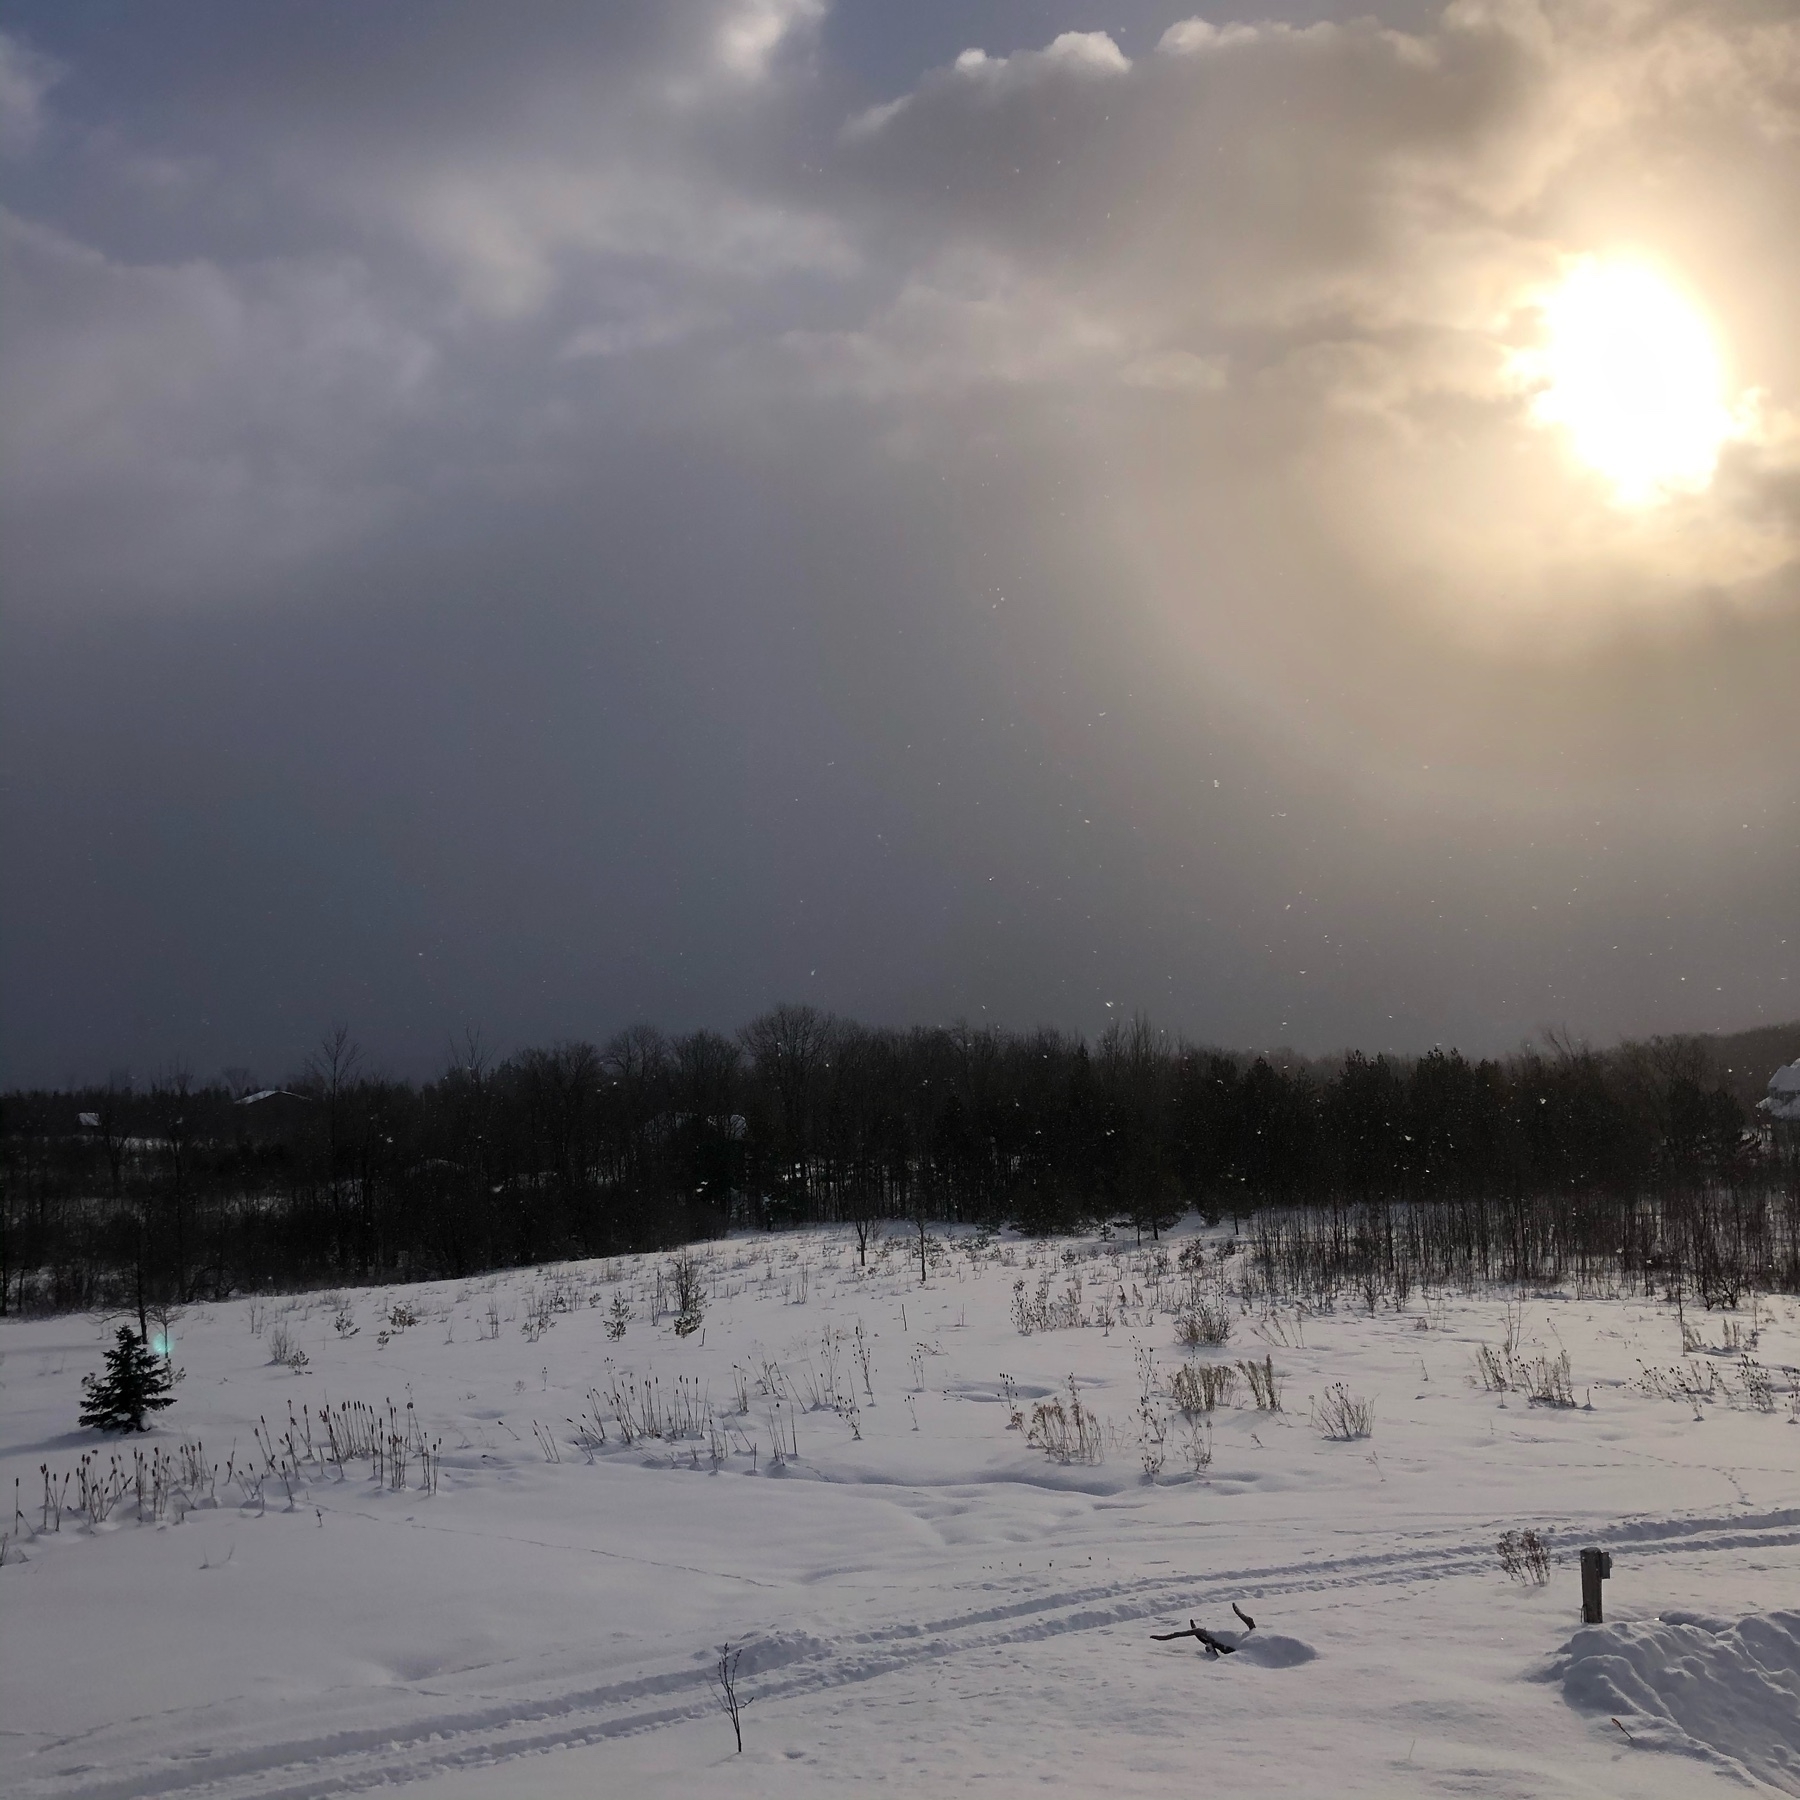 sun behind thin clouds with dark sky. some snow flakes are falling. there is a row of trees. the ground is snow-covered